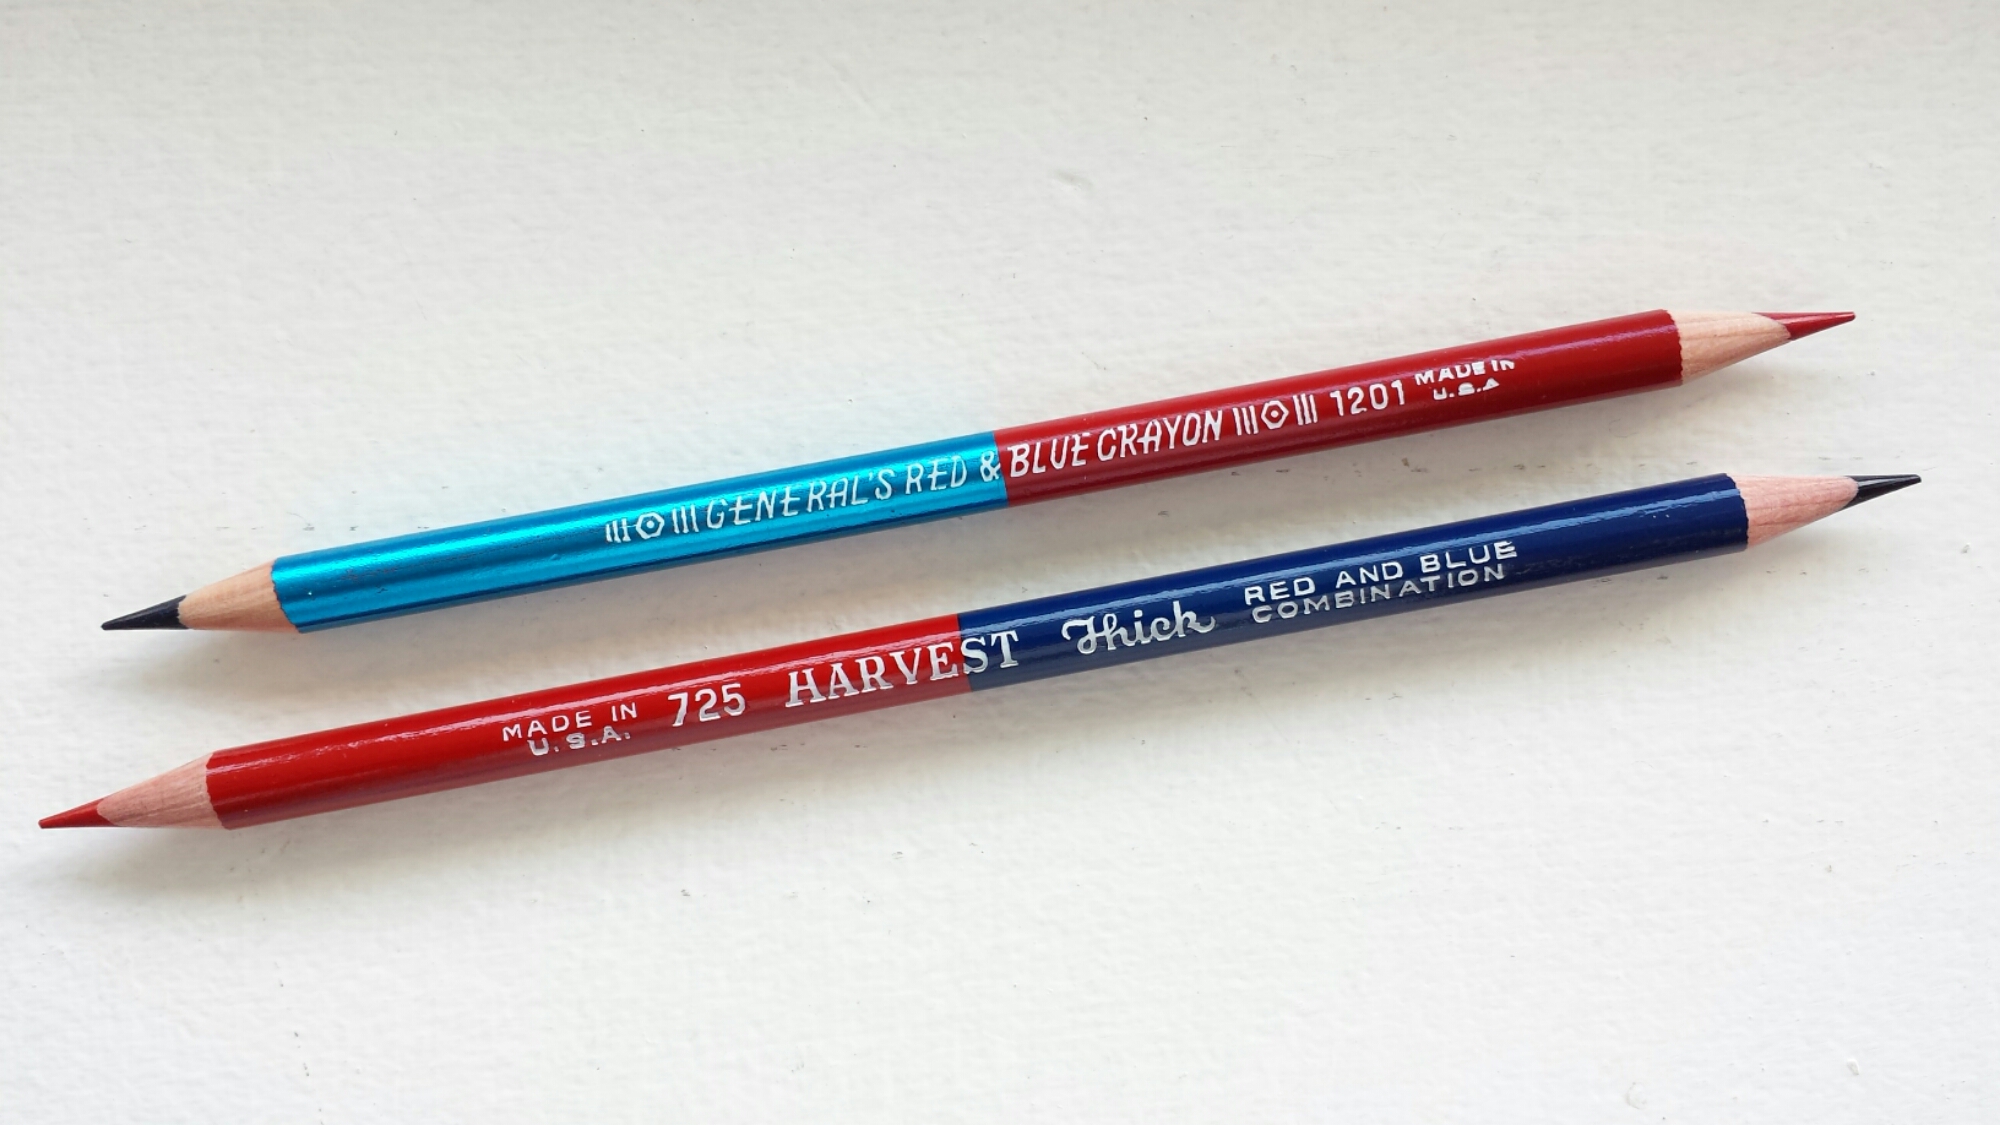 General's – pencils and other things